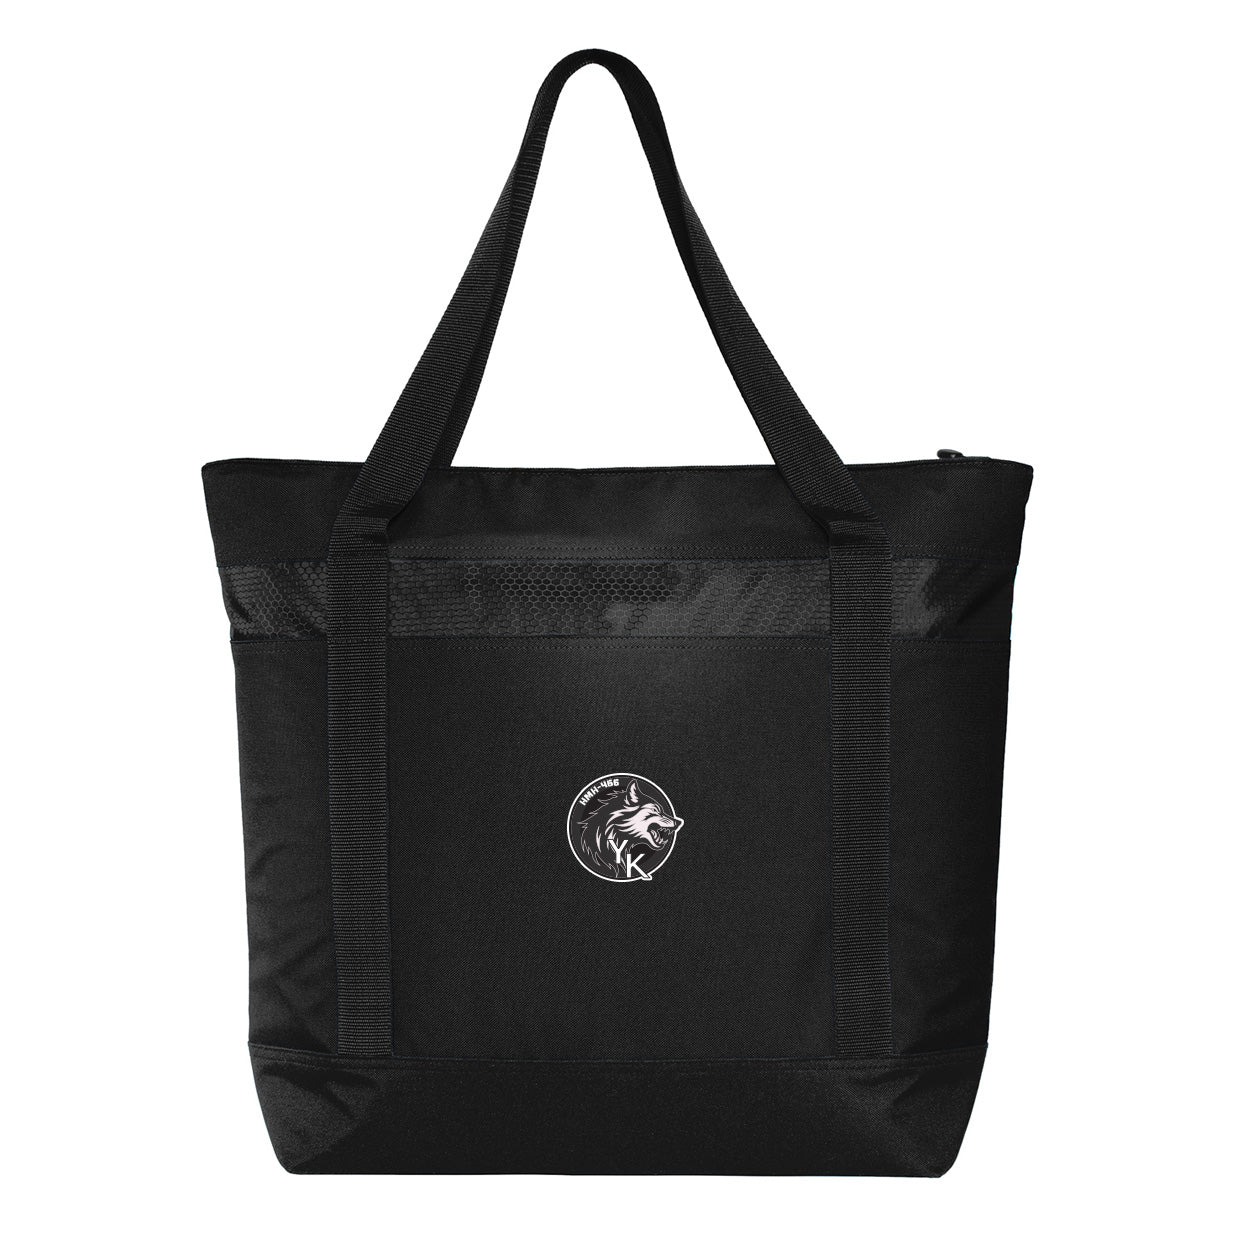 HMH-466 WOLF LARGE TOTE COOLER